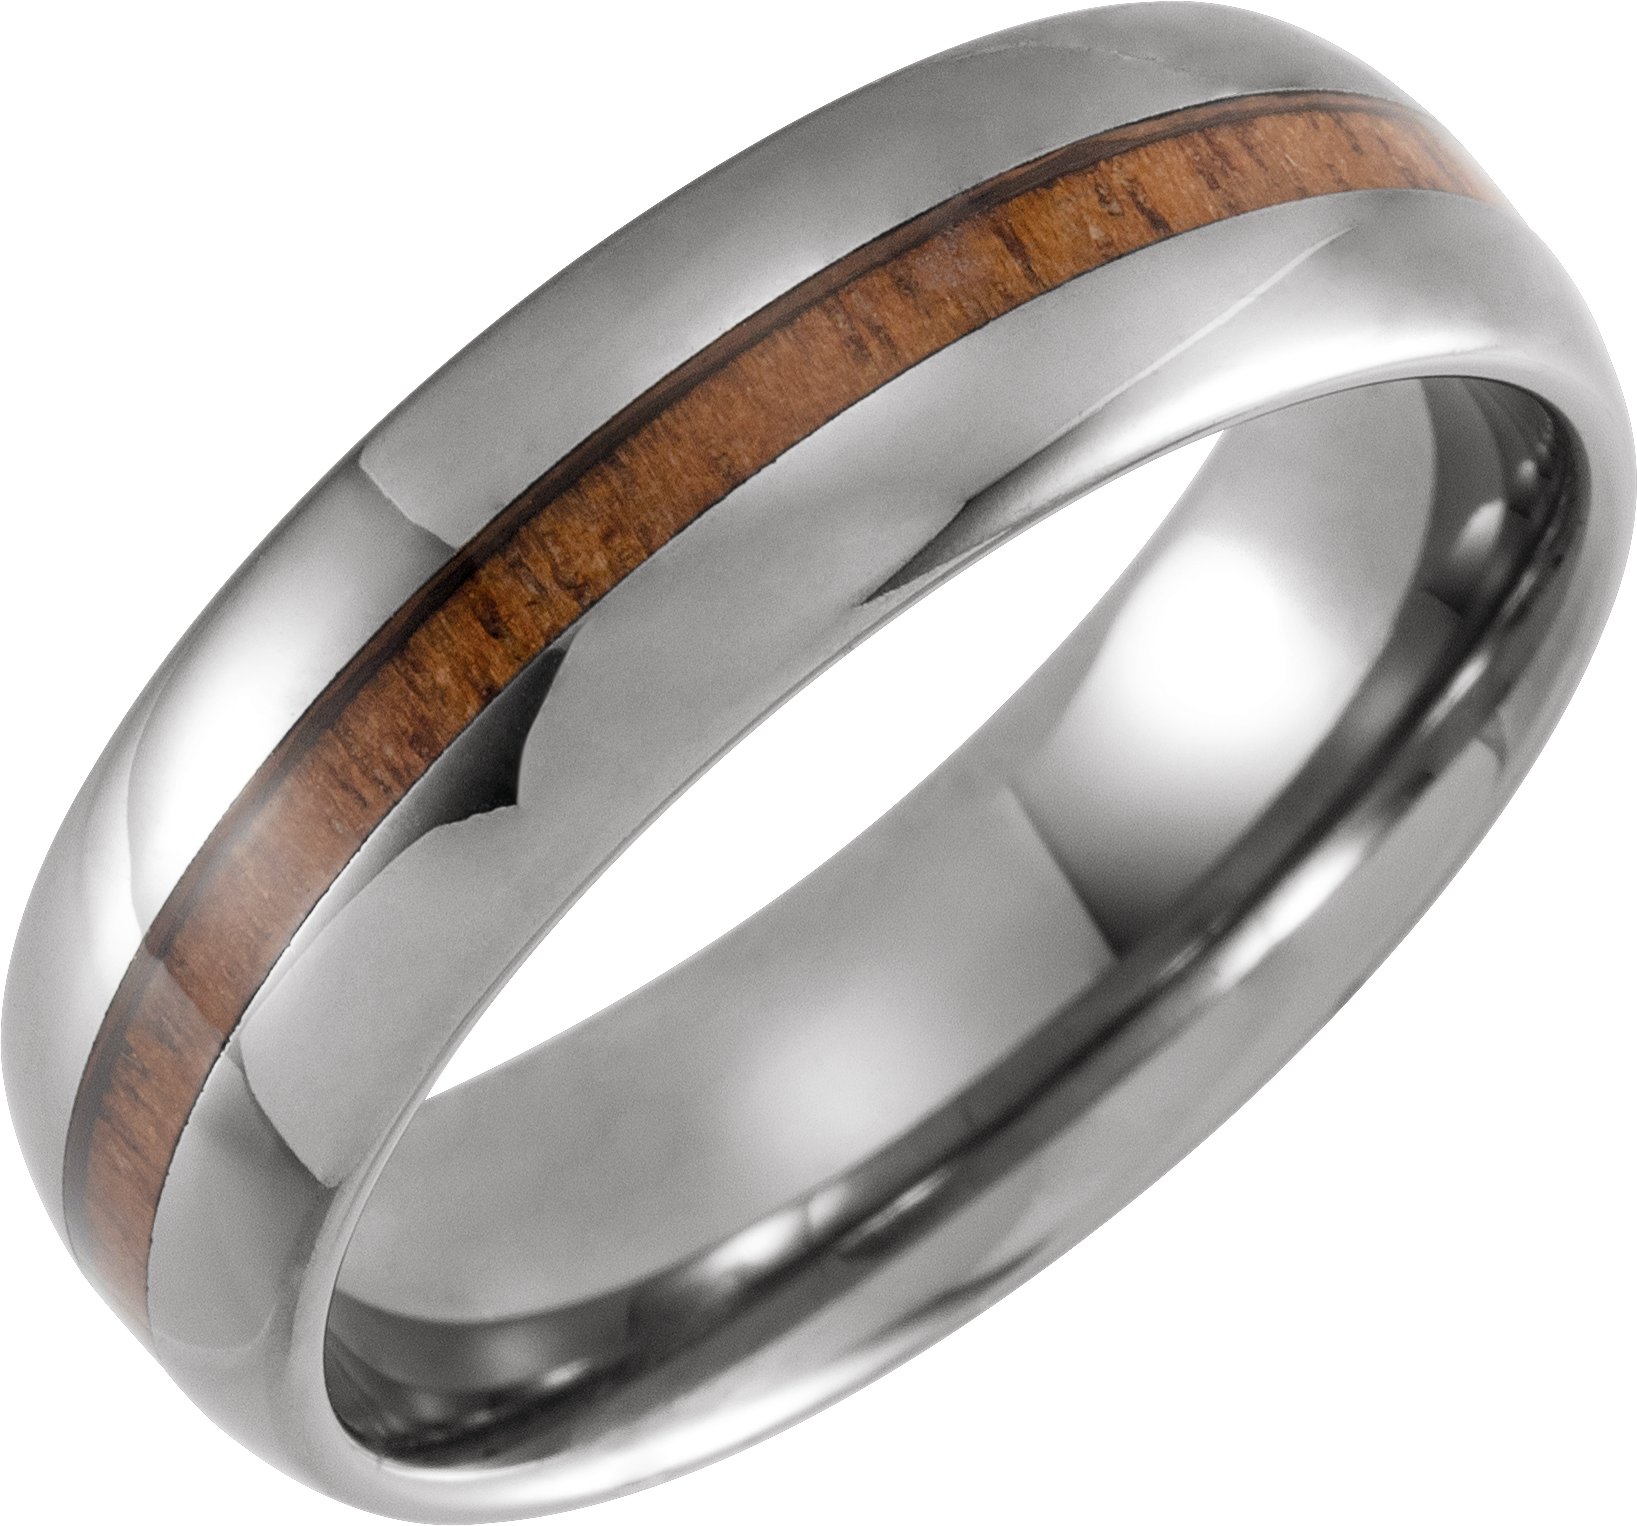 Tungsten 8 mm Half Round Band with Acacia Wood Inlay Size 7.5